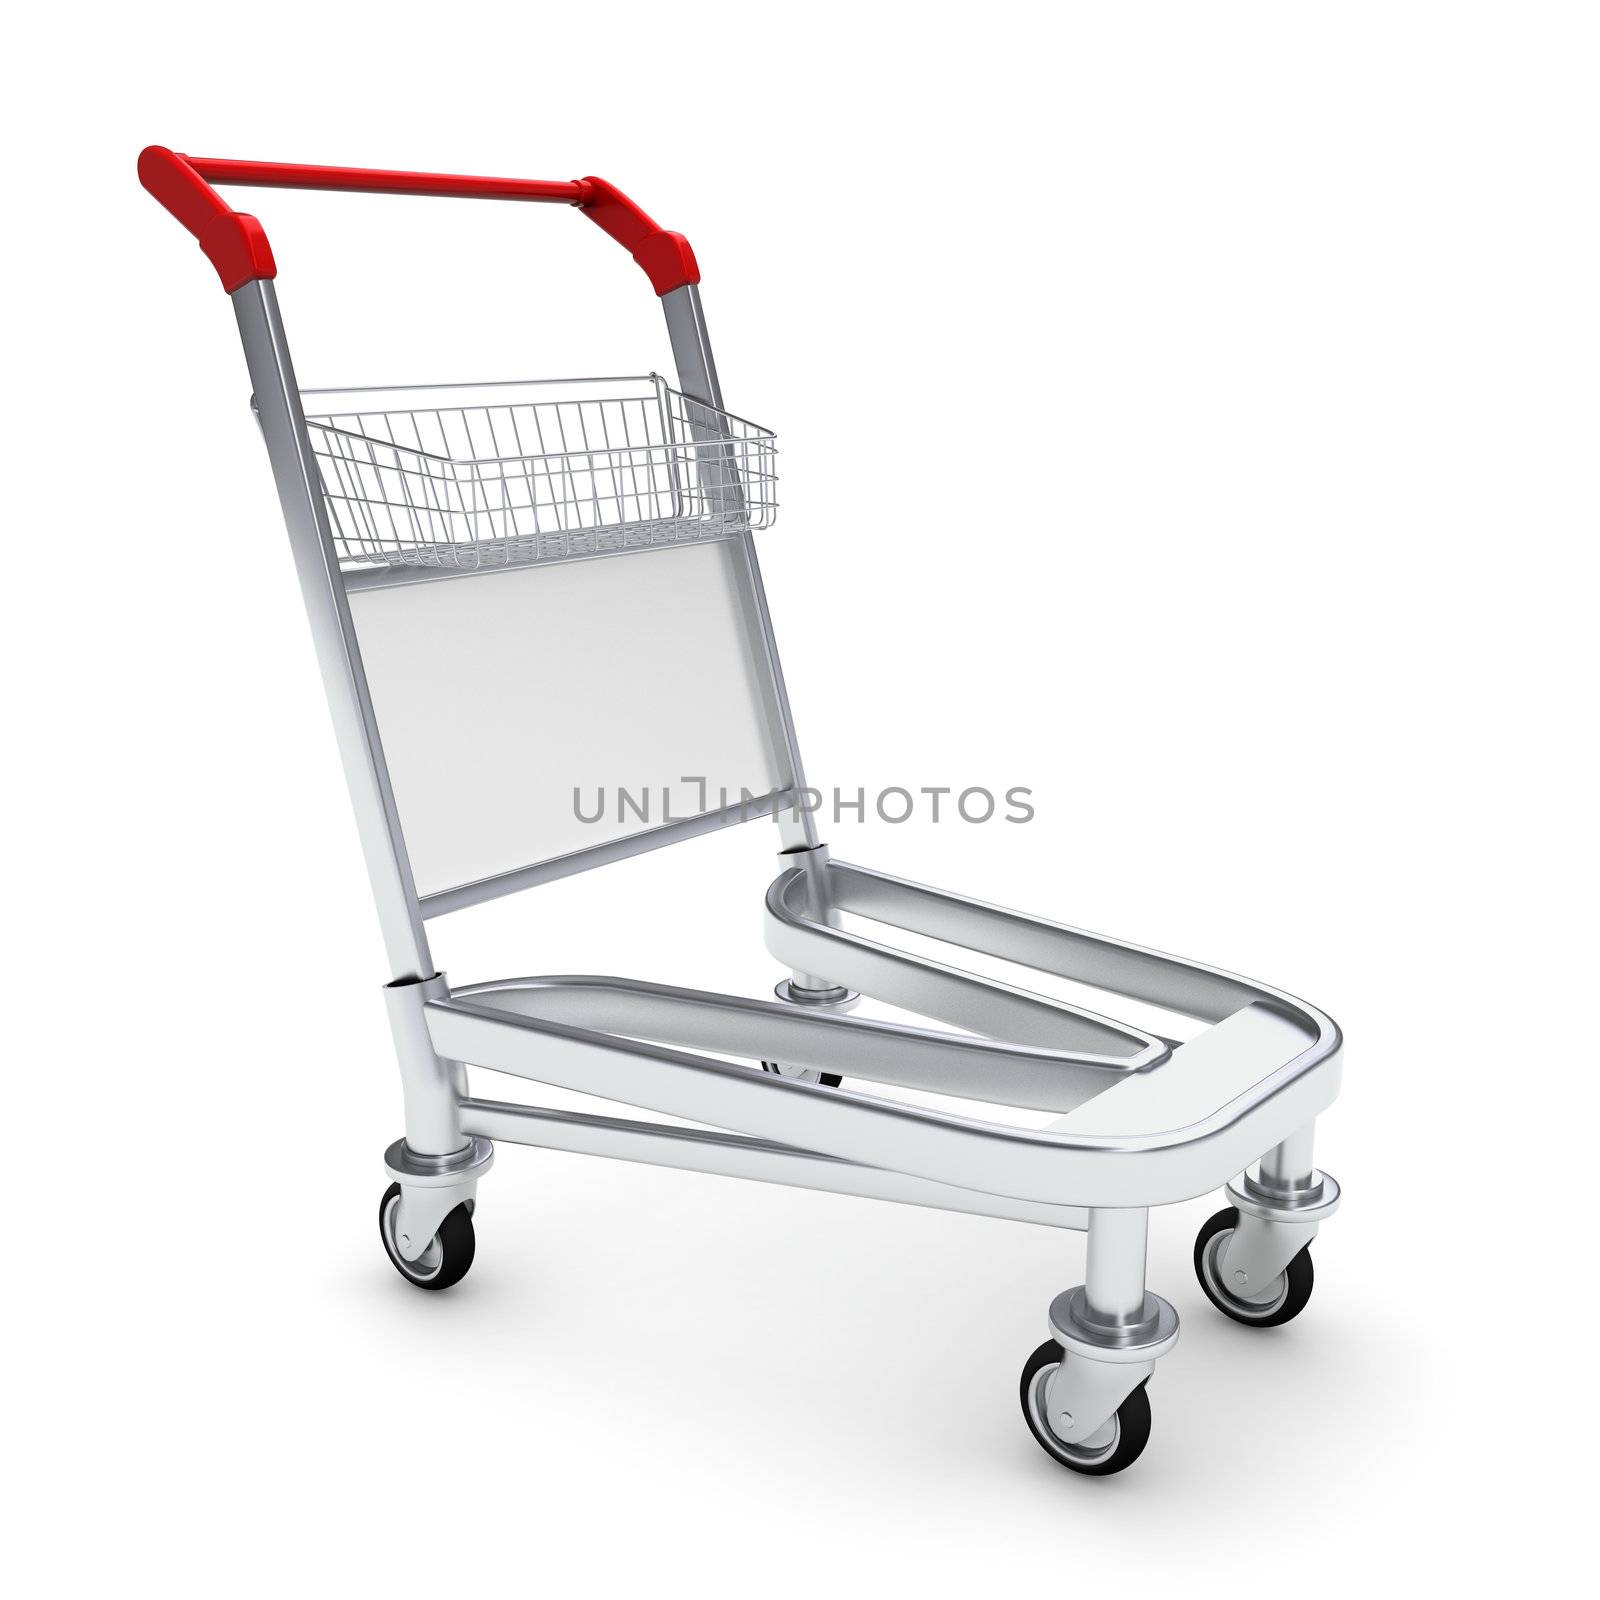 Trolley for luggage at the airport. Isolated on white background